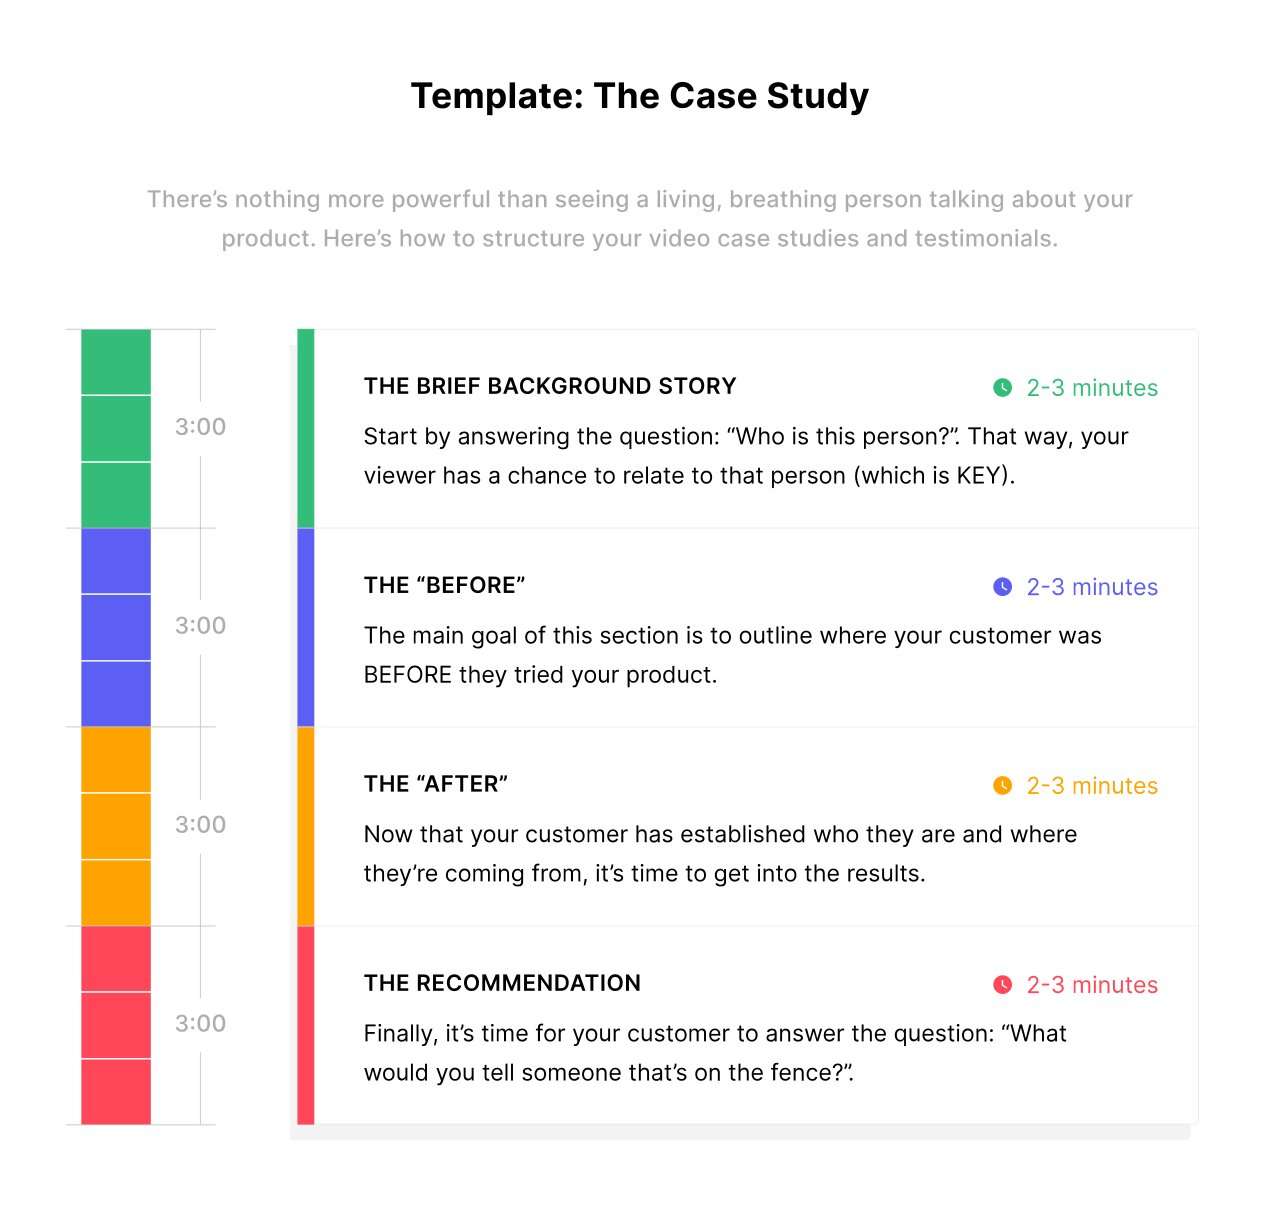 Template #4: The Case Study